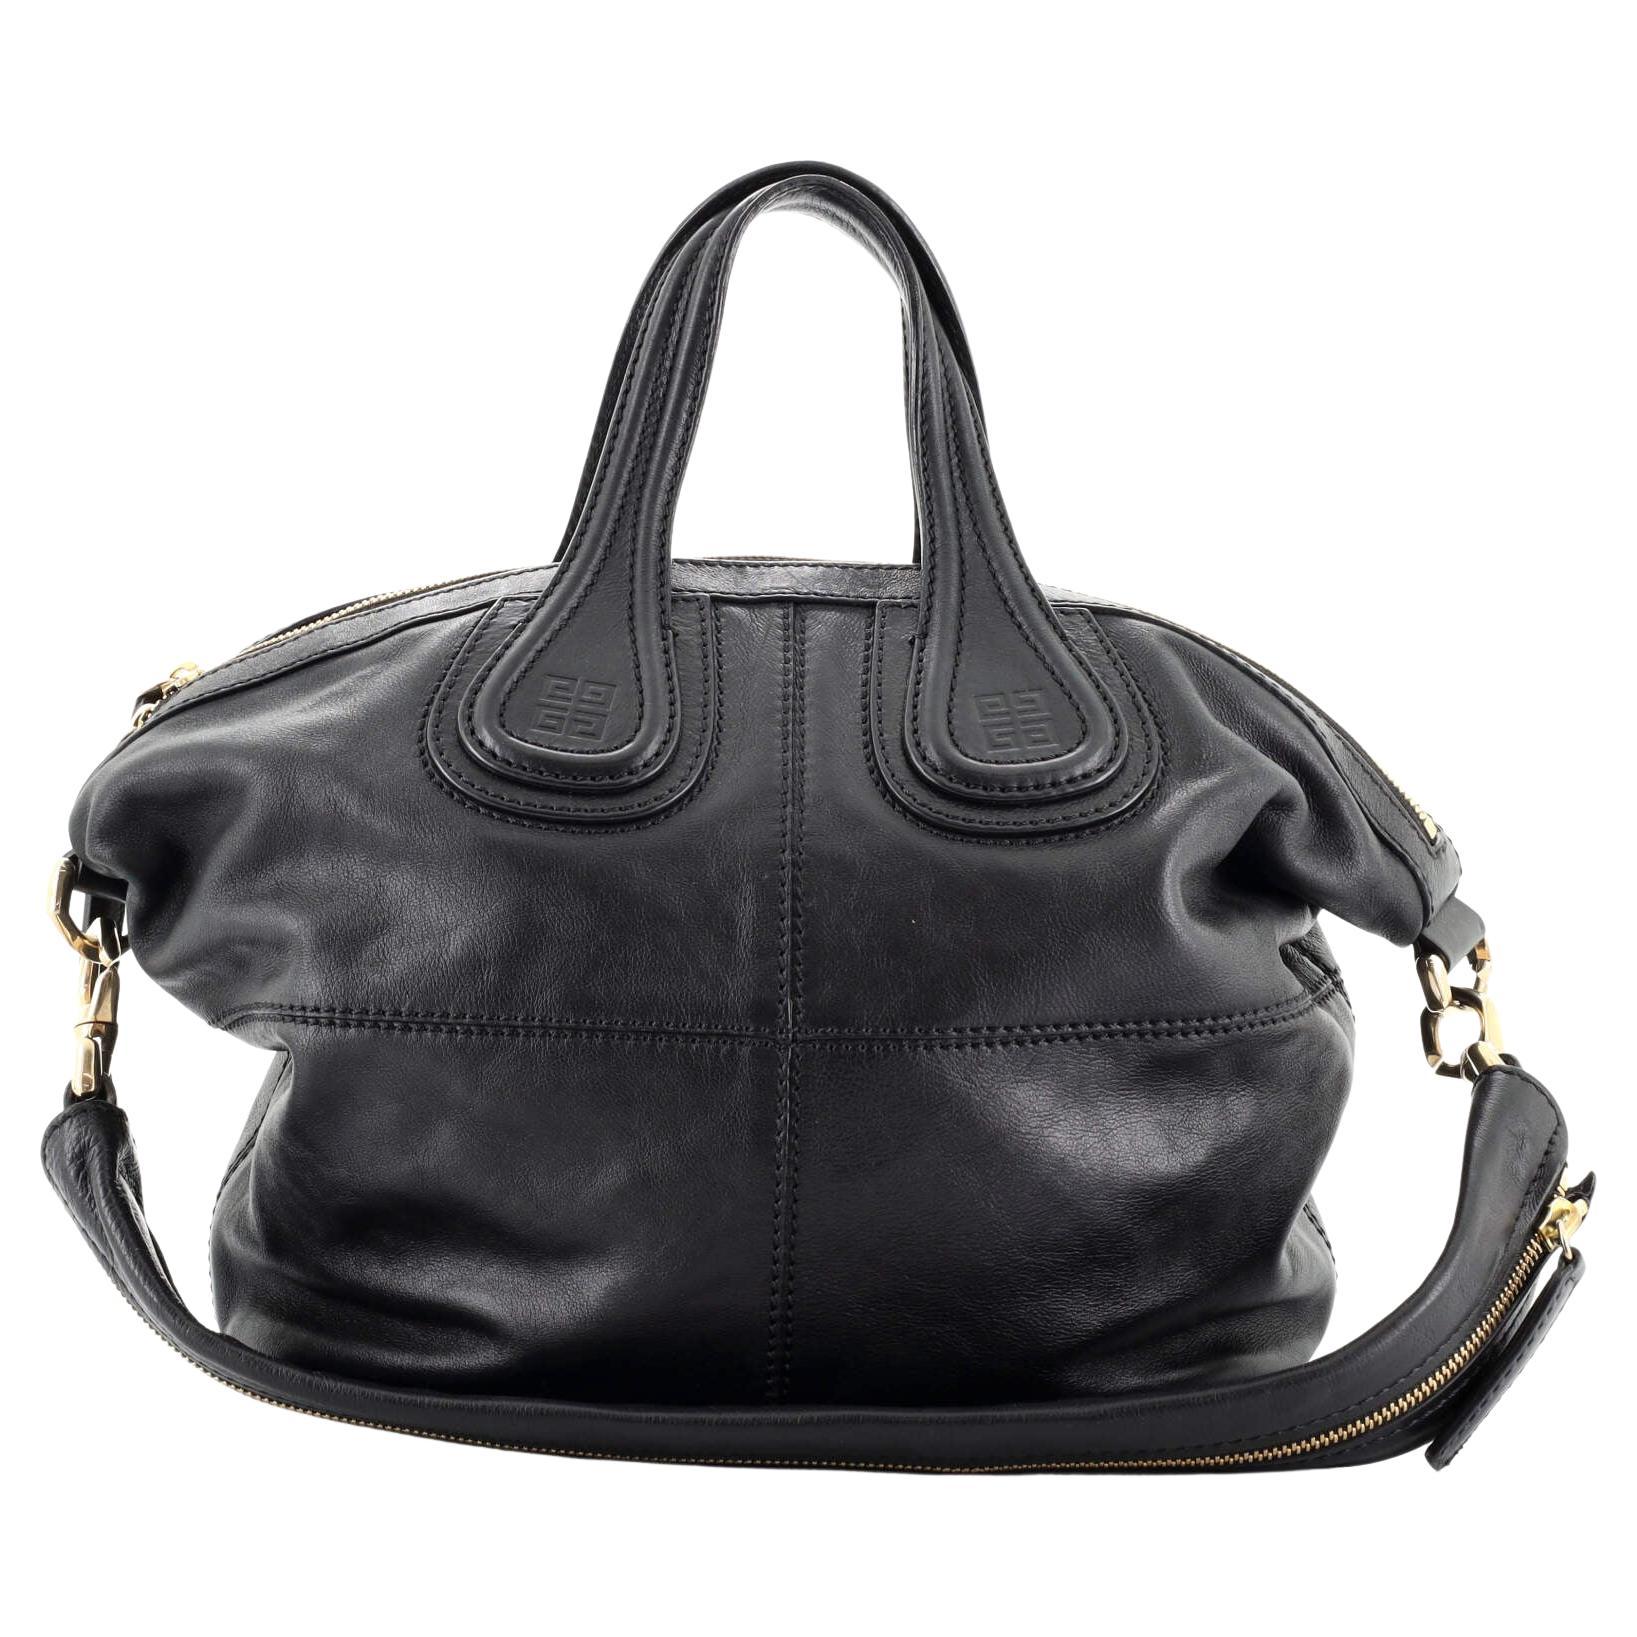 Givenchy Nightingale Satchel Leather Small